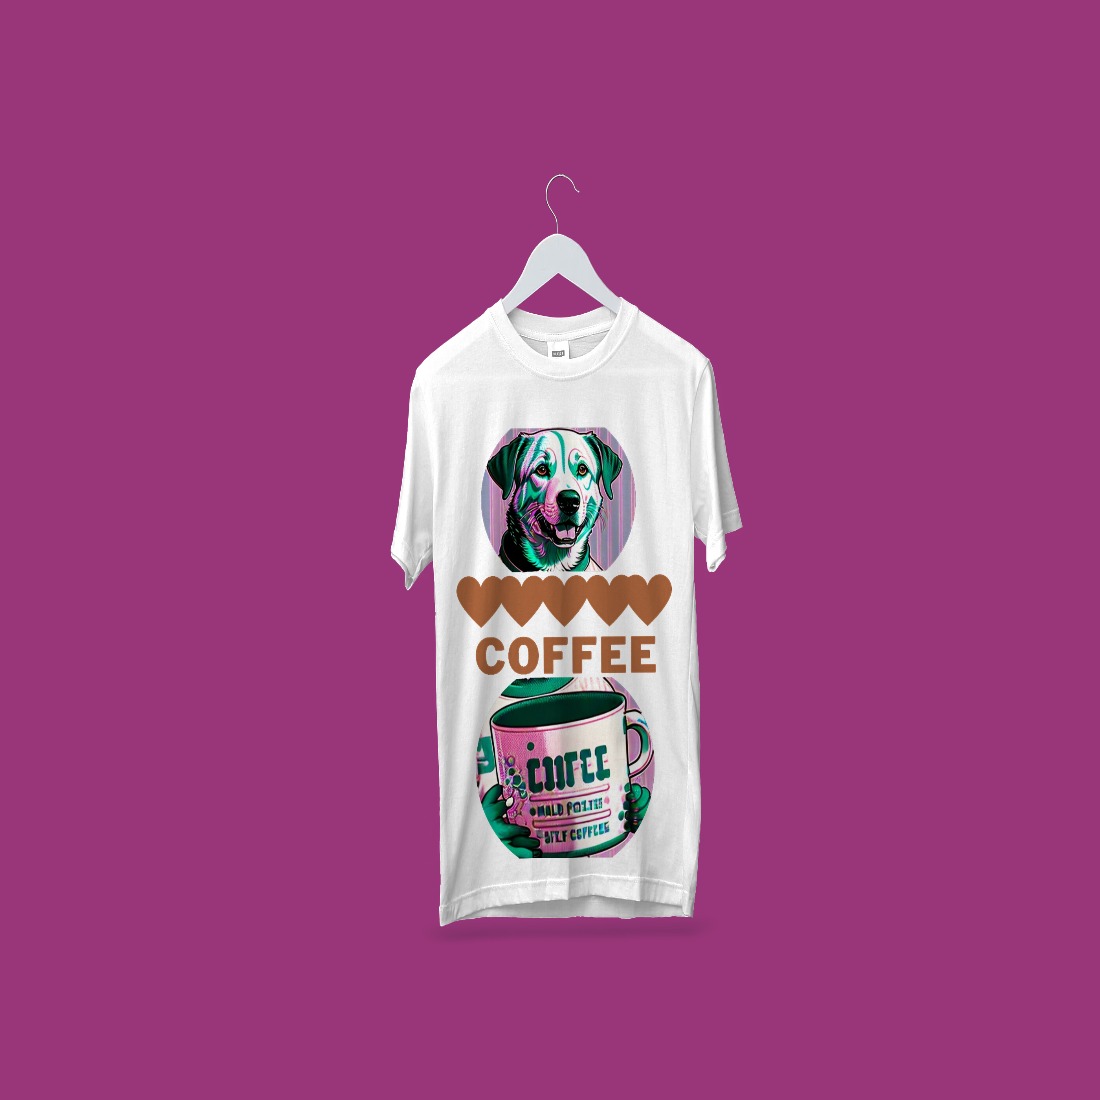 GOOD BOY LOVES COFFEE - T-shirt design cover image.